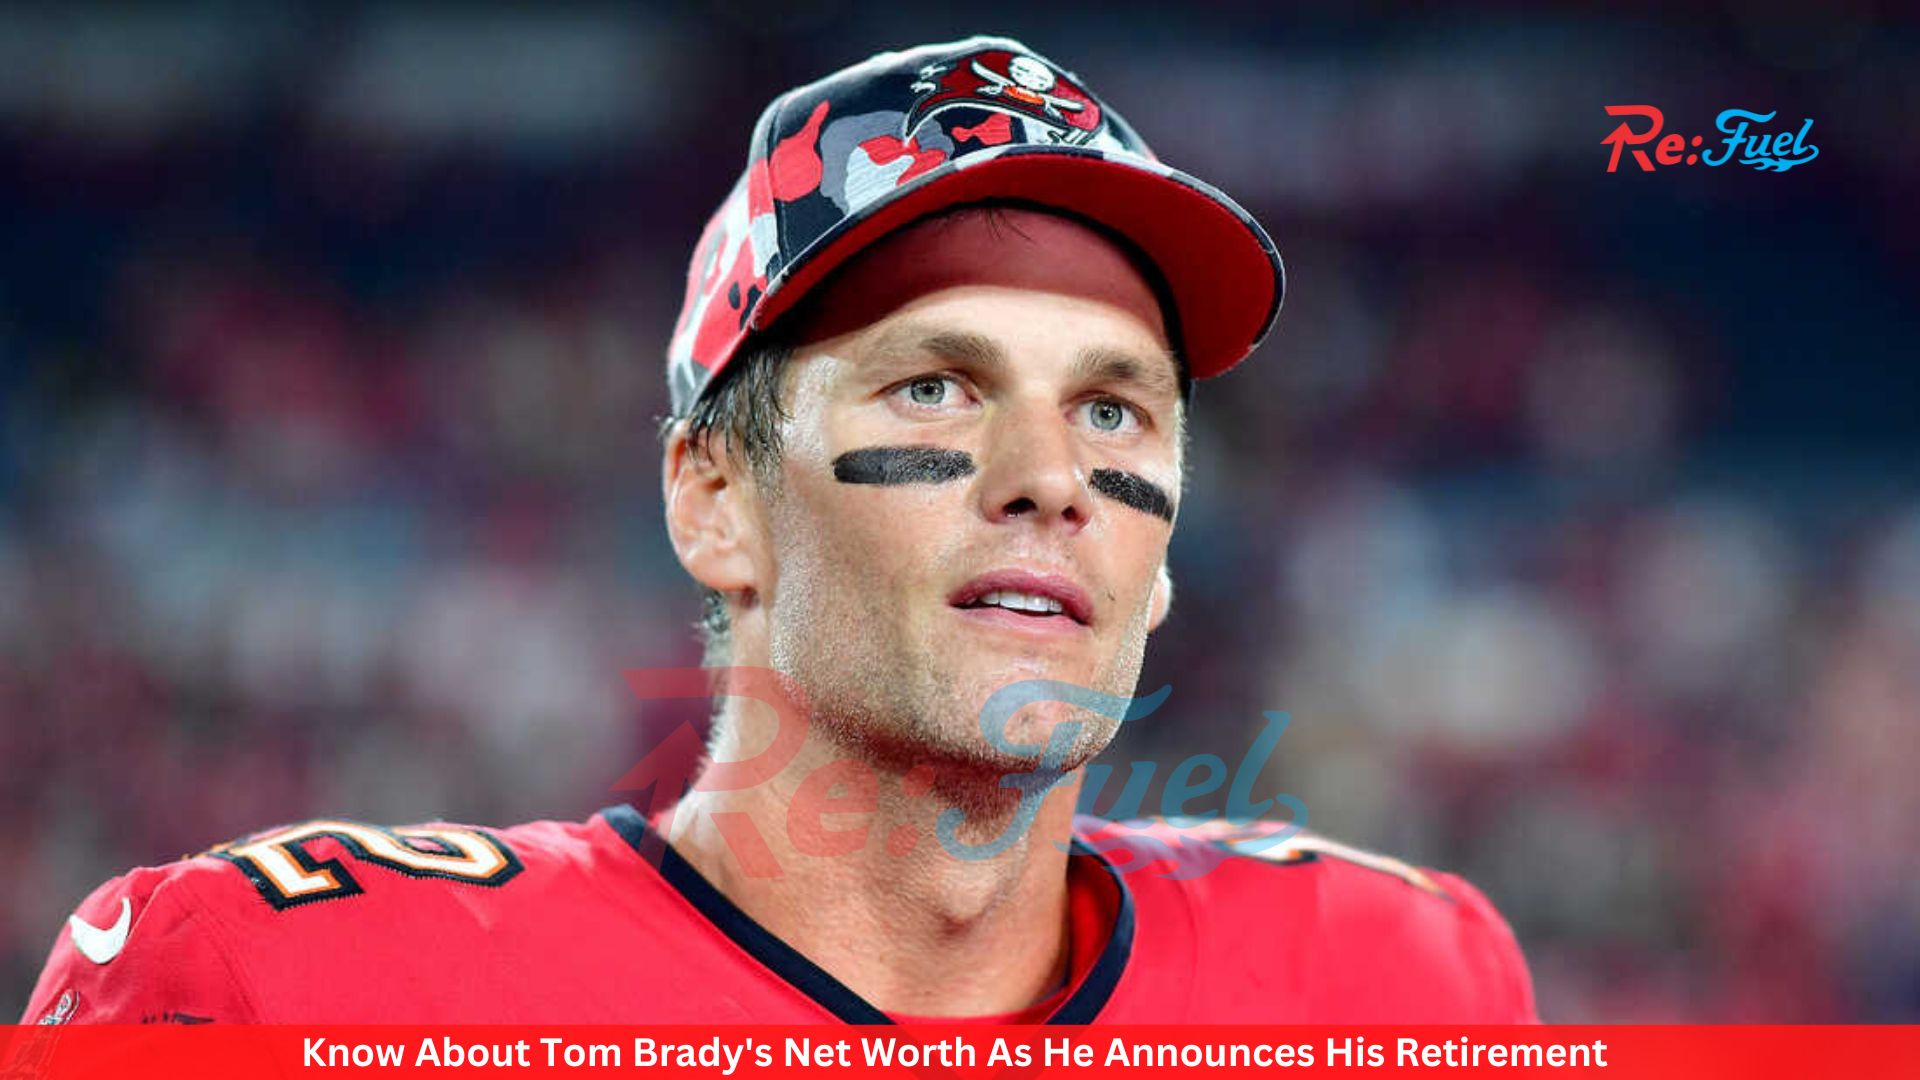 Know About Tom Brady's Net Worth As He Announces His Retirement